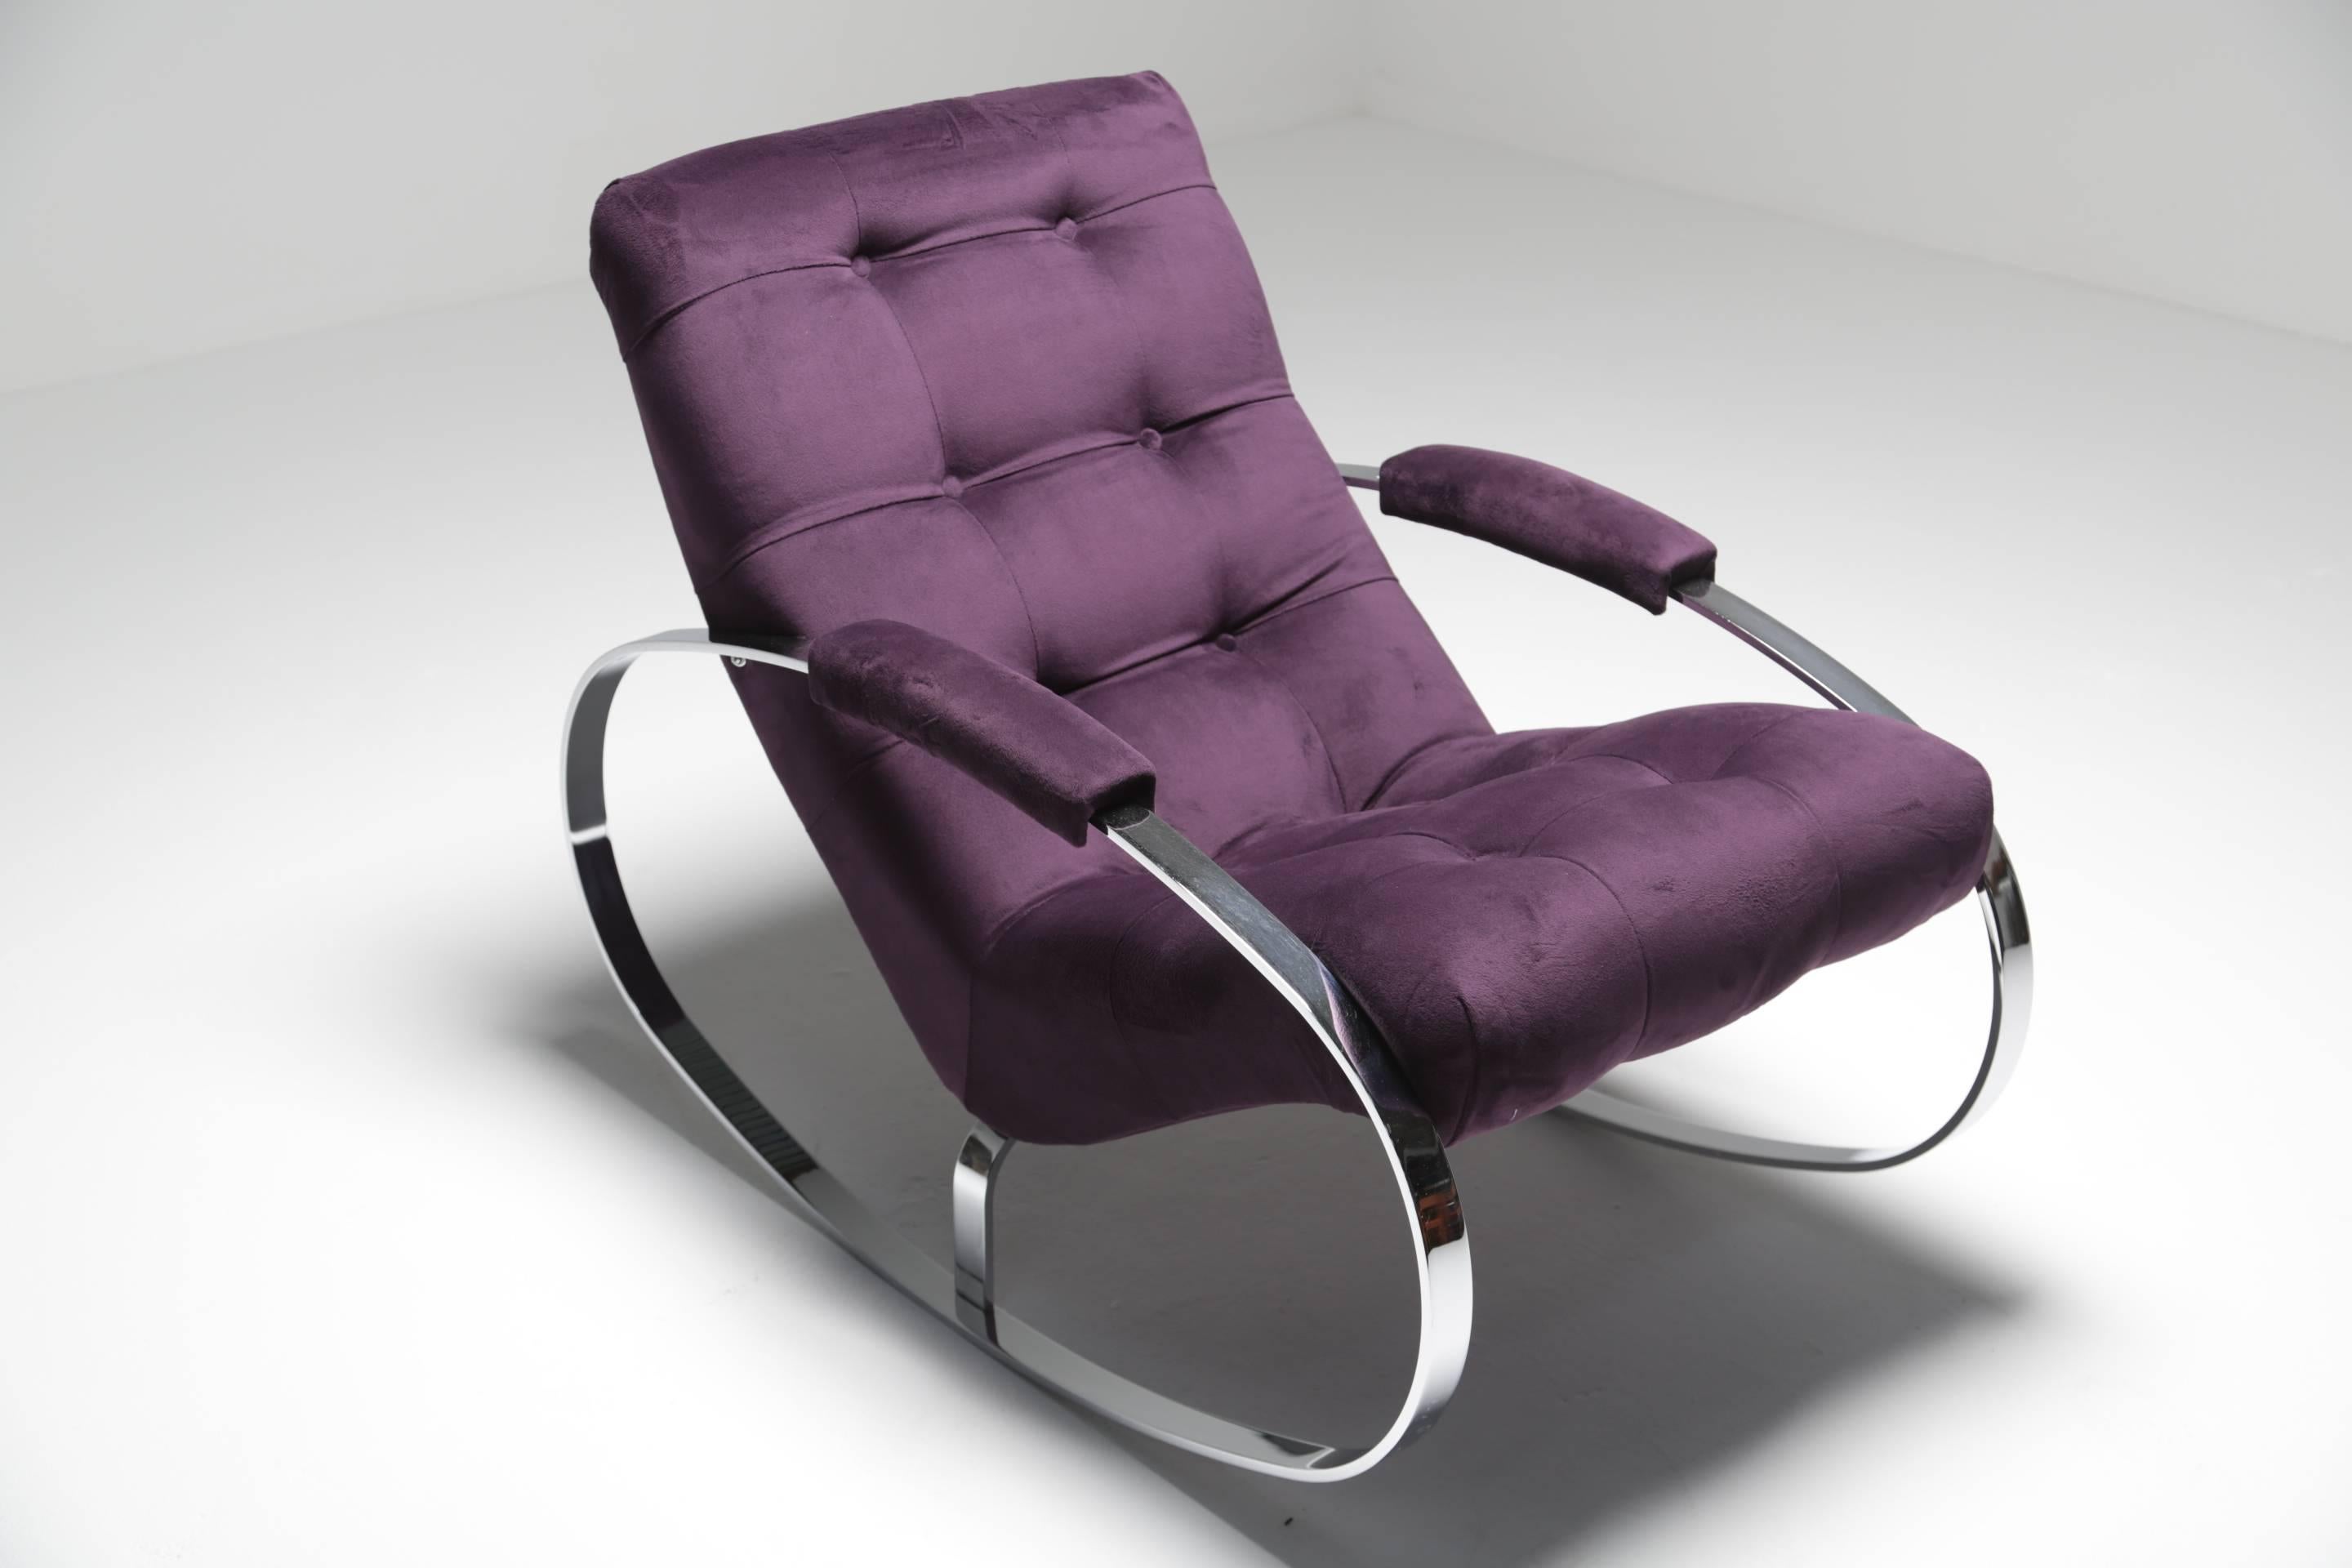 Stunning Ellipse rocker / rocking chair by Renato Zevi, Italy, circa 1970s. This is a very cool statement midcentury piece which has been fully restored and reupholstered in a high quality luxe purple velvet which really makes this chair pop! The